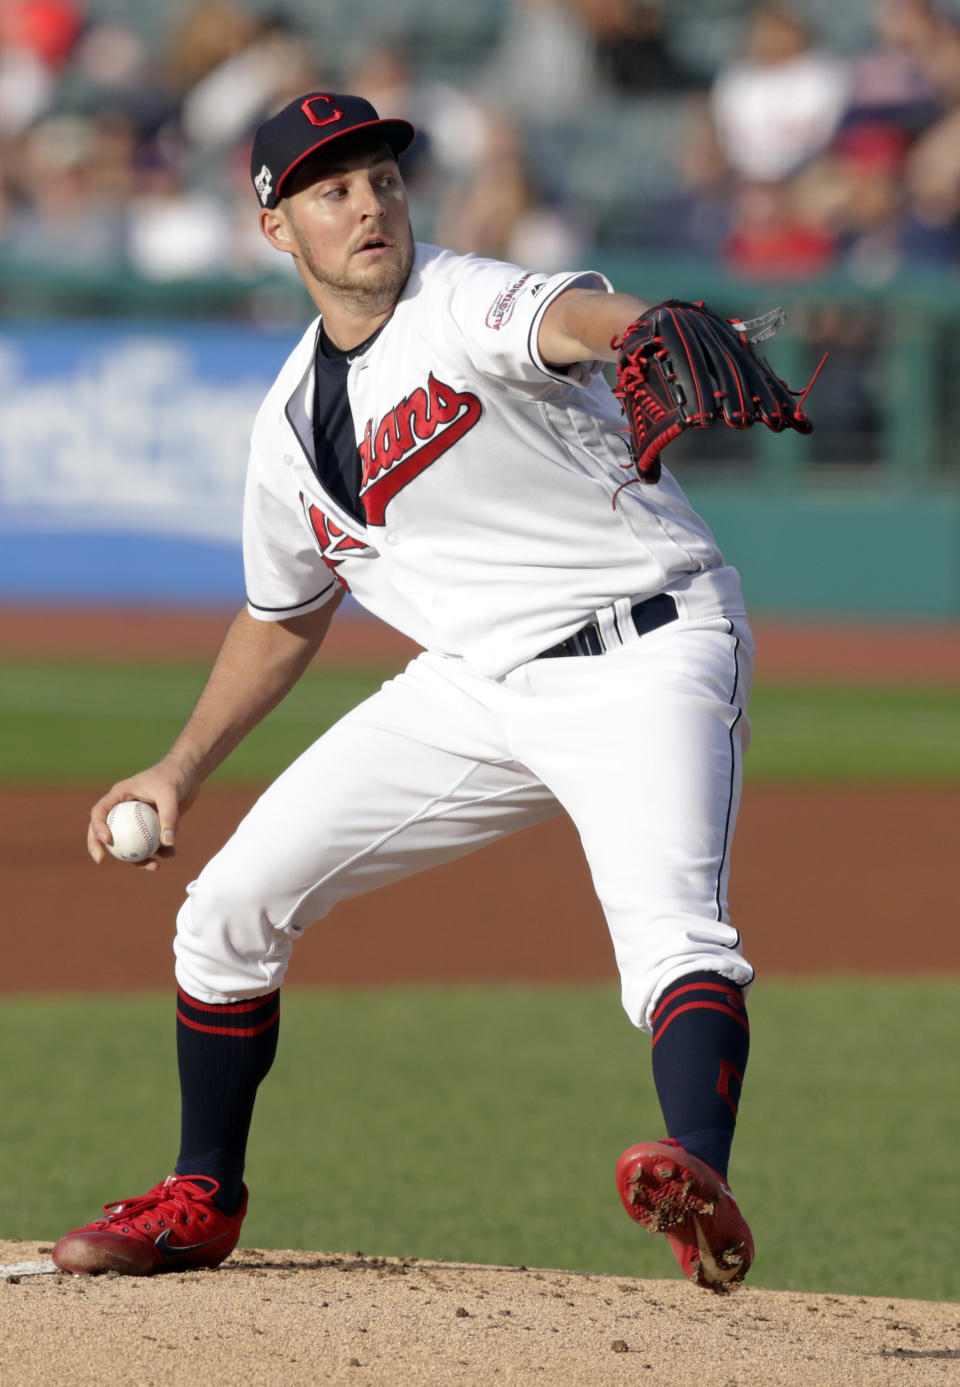 Cleveland Indians starting pitcher Trevor Bauer delivers in the first inning of the team's baseball game against the Minnesota Twins, Thursday, June 6, 2019, in Cleveland. (AP Photo/Tony Dejak)